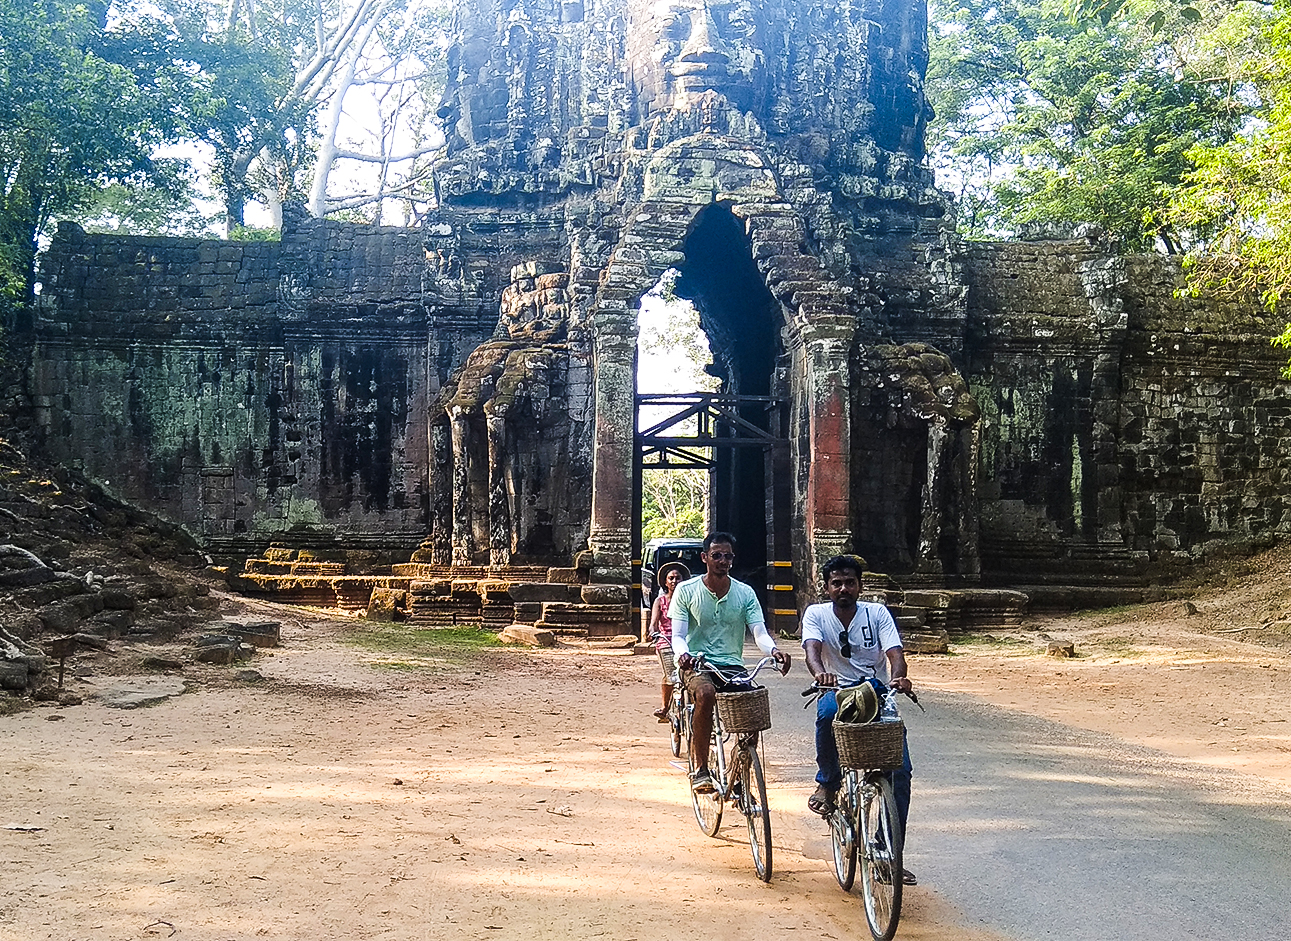 Bicycle Tours - Explore scenic routes and enjoy adventurous trips on guided bicycle tours